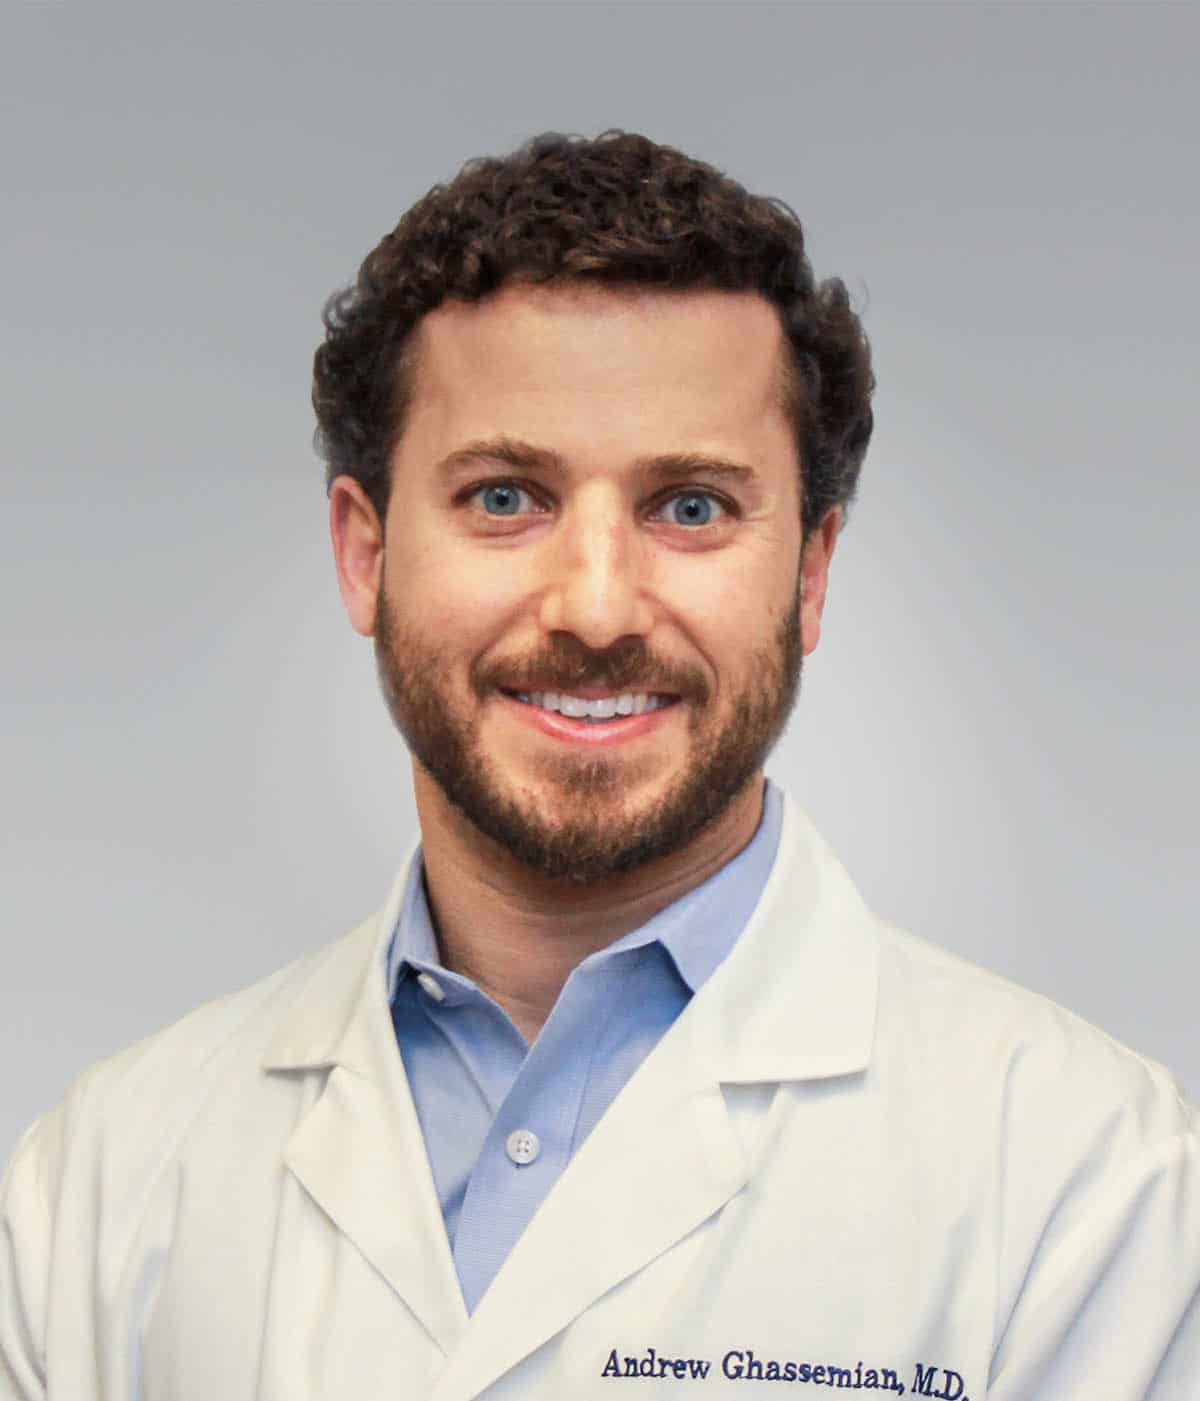 Andrew Ghassemian, MD